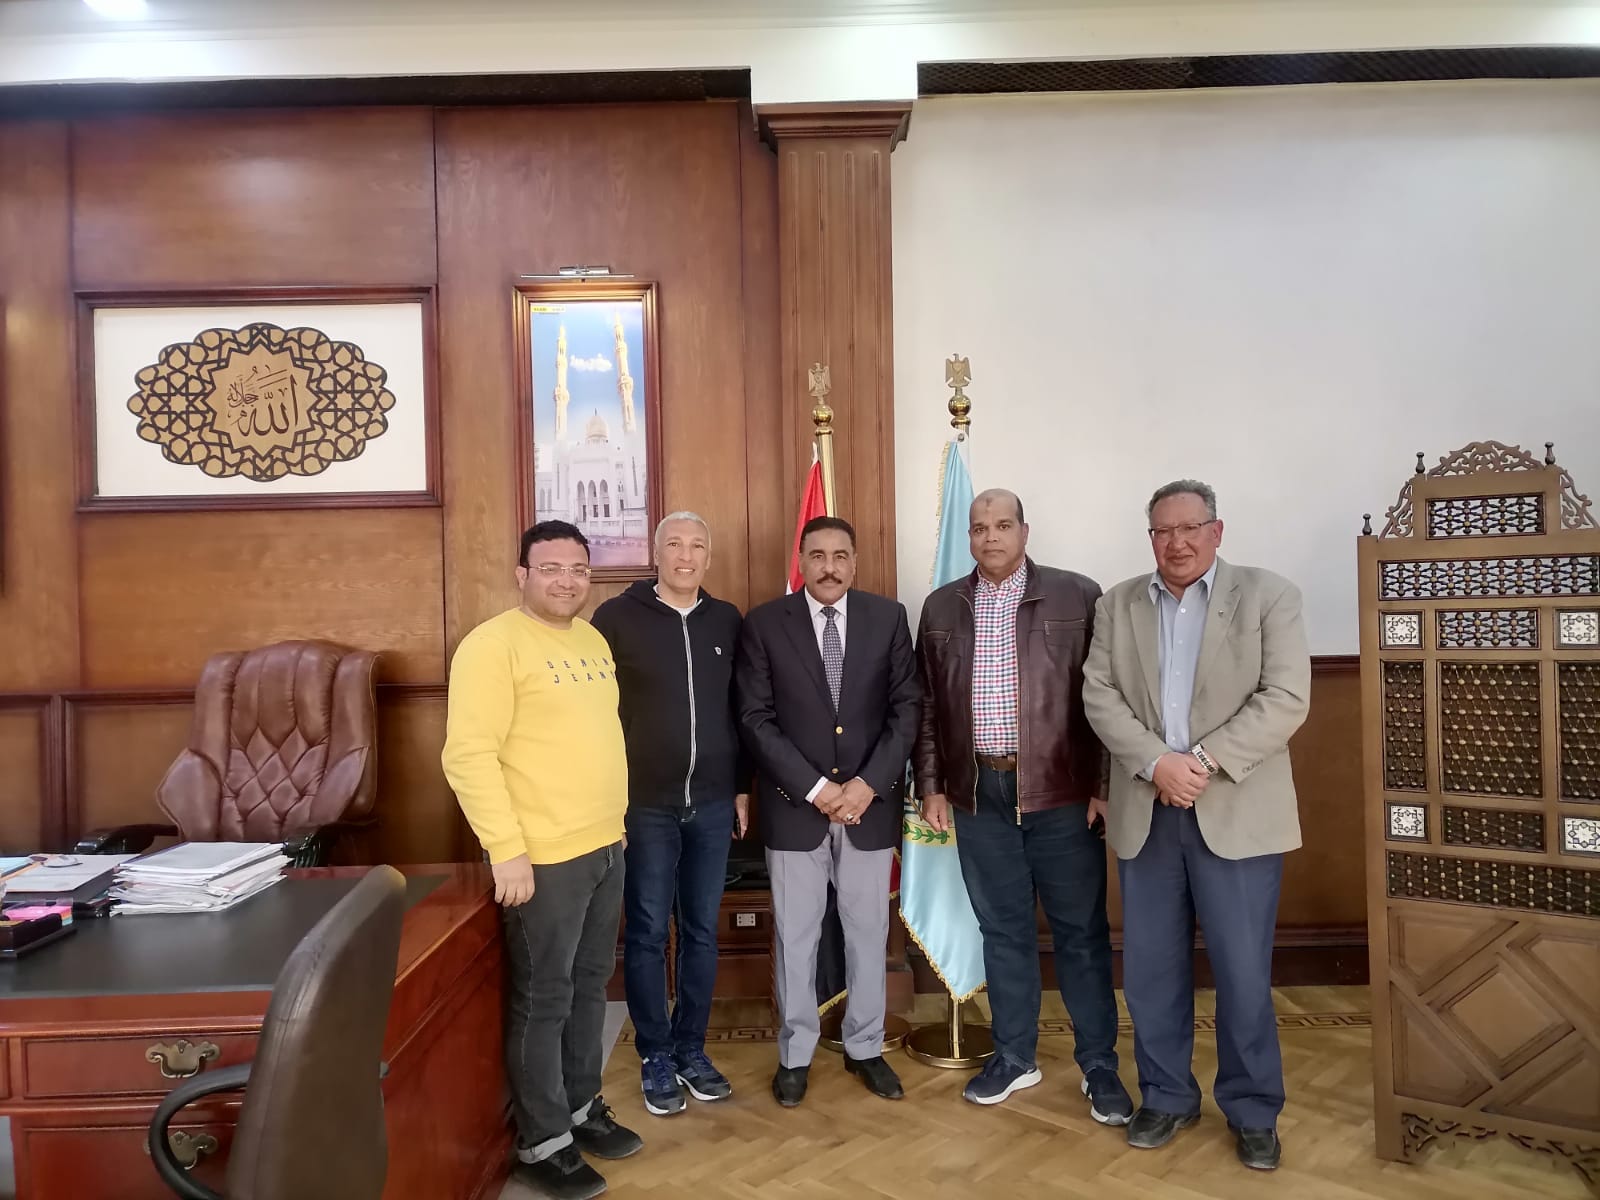 The Dean of Menoufia Arts and the research team meet with the Governor of Matrouh